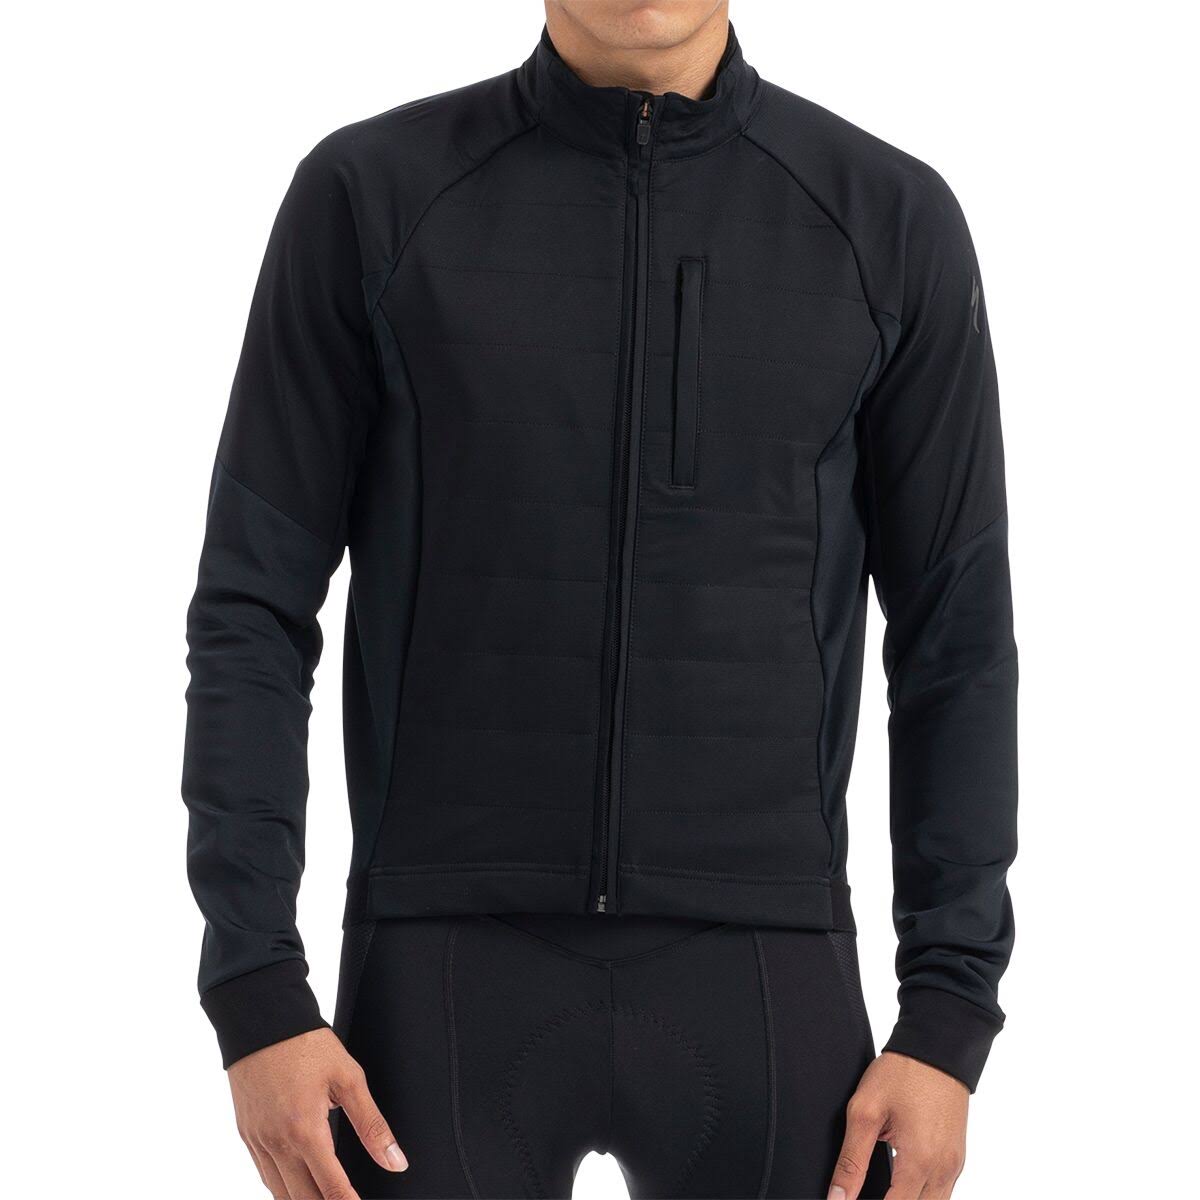 Specialized Men's Therminal Deflect Jacket-Black